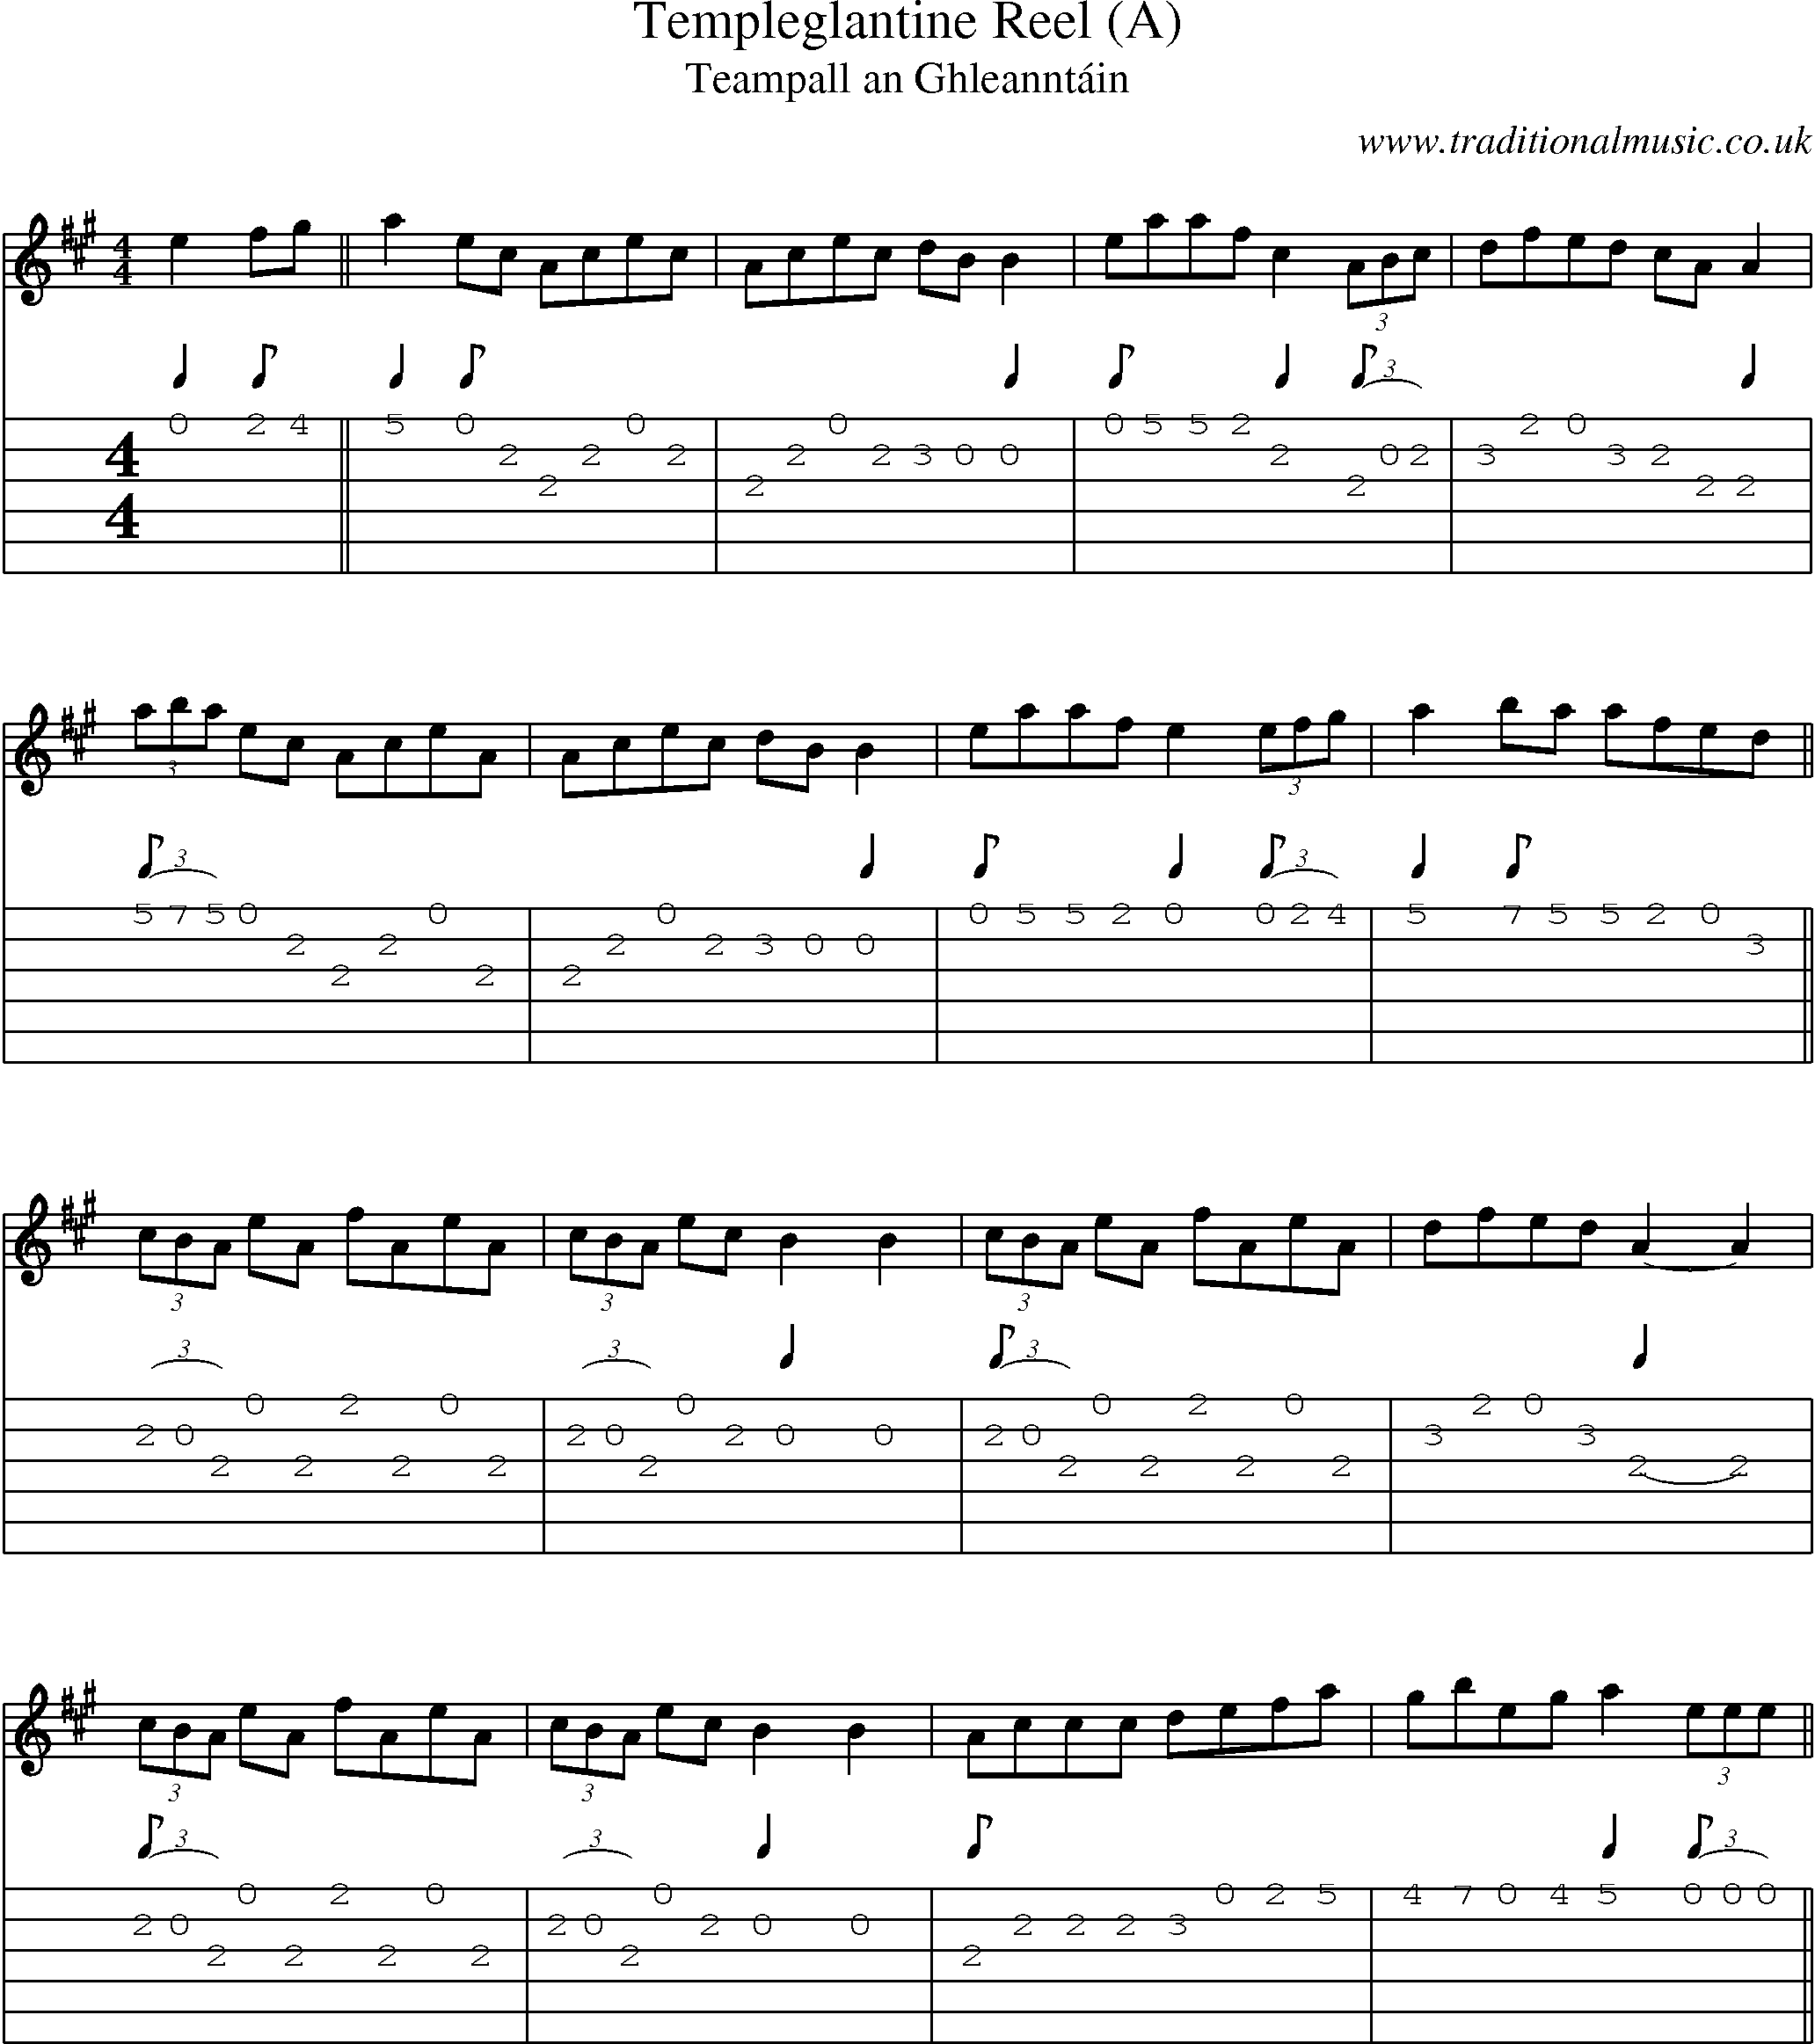 Music Score and Guitar Tabs for Templeglantine Reel (a)